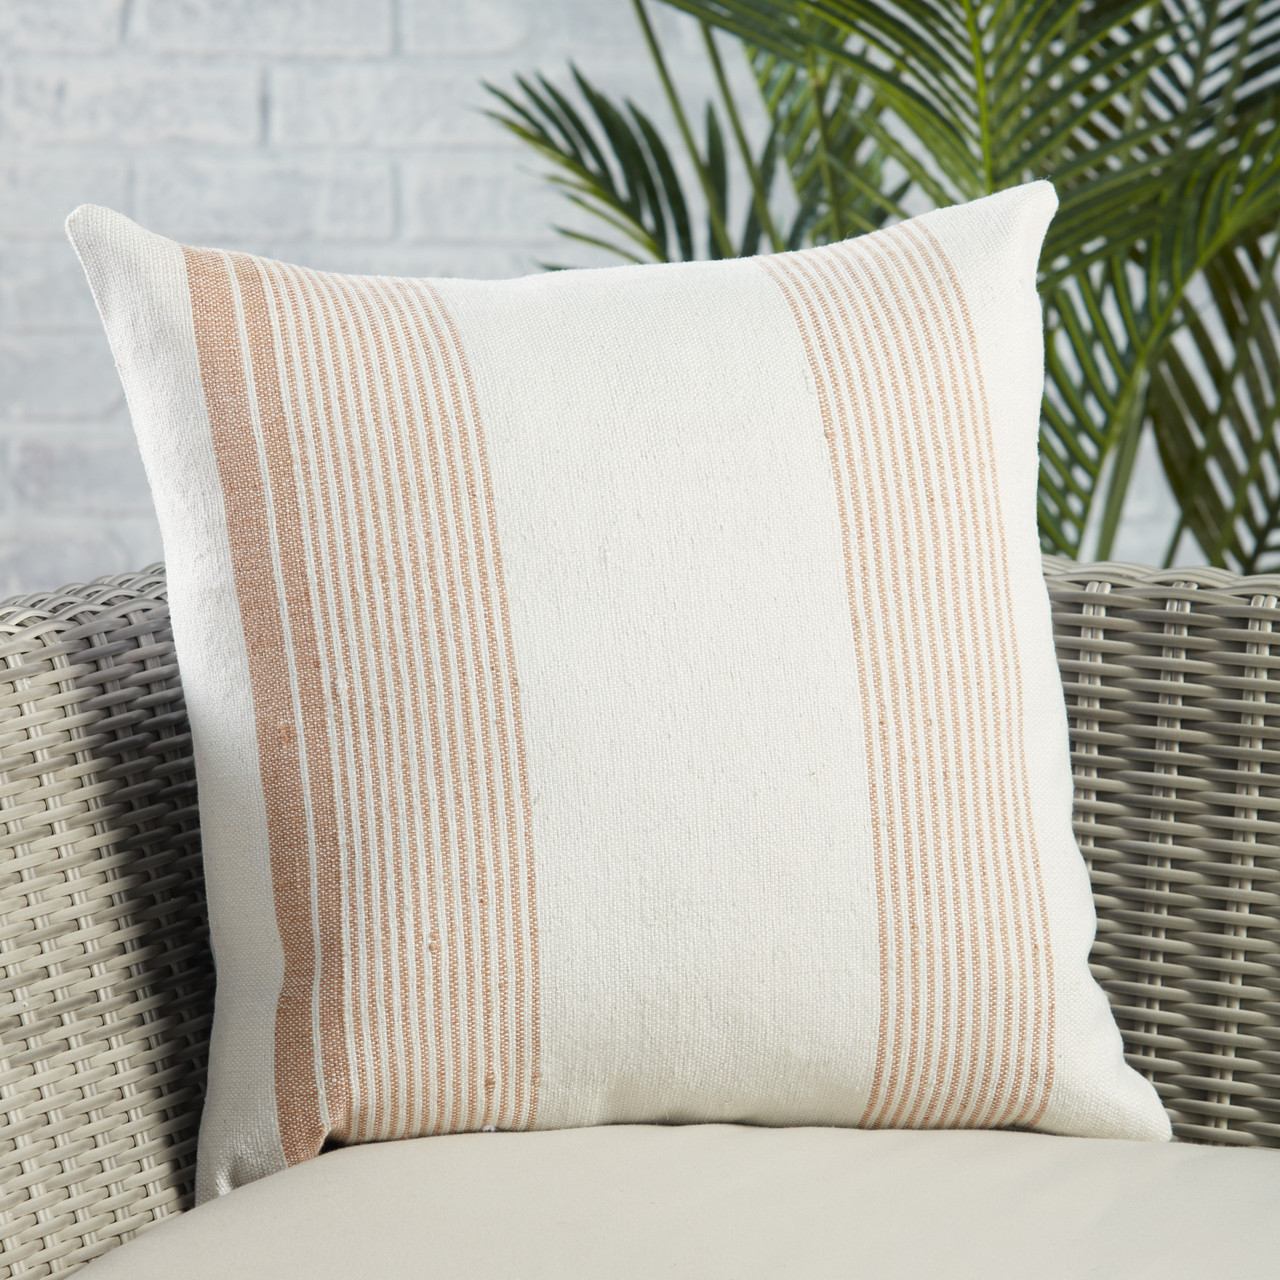 The pillow from the Jaipur Living brand is very comfortable and pleasant to the touch